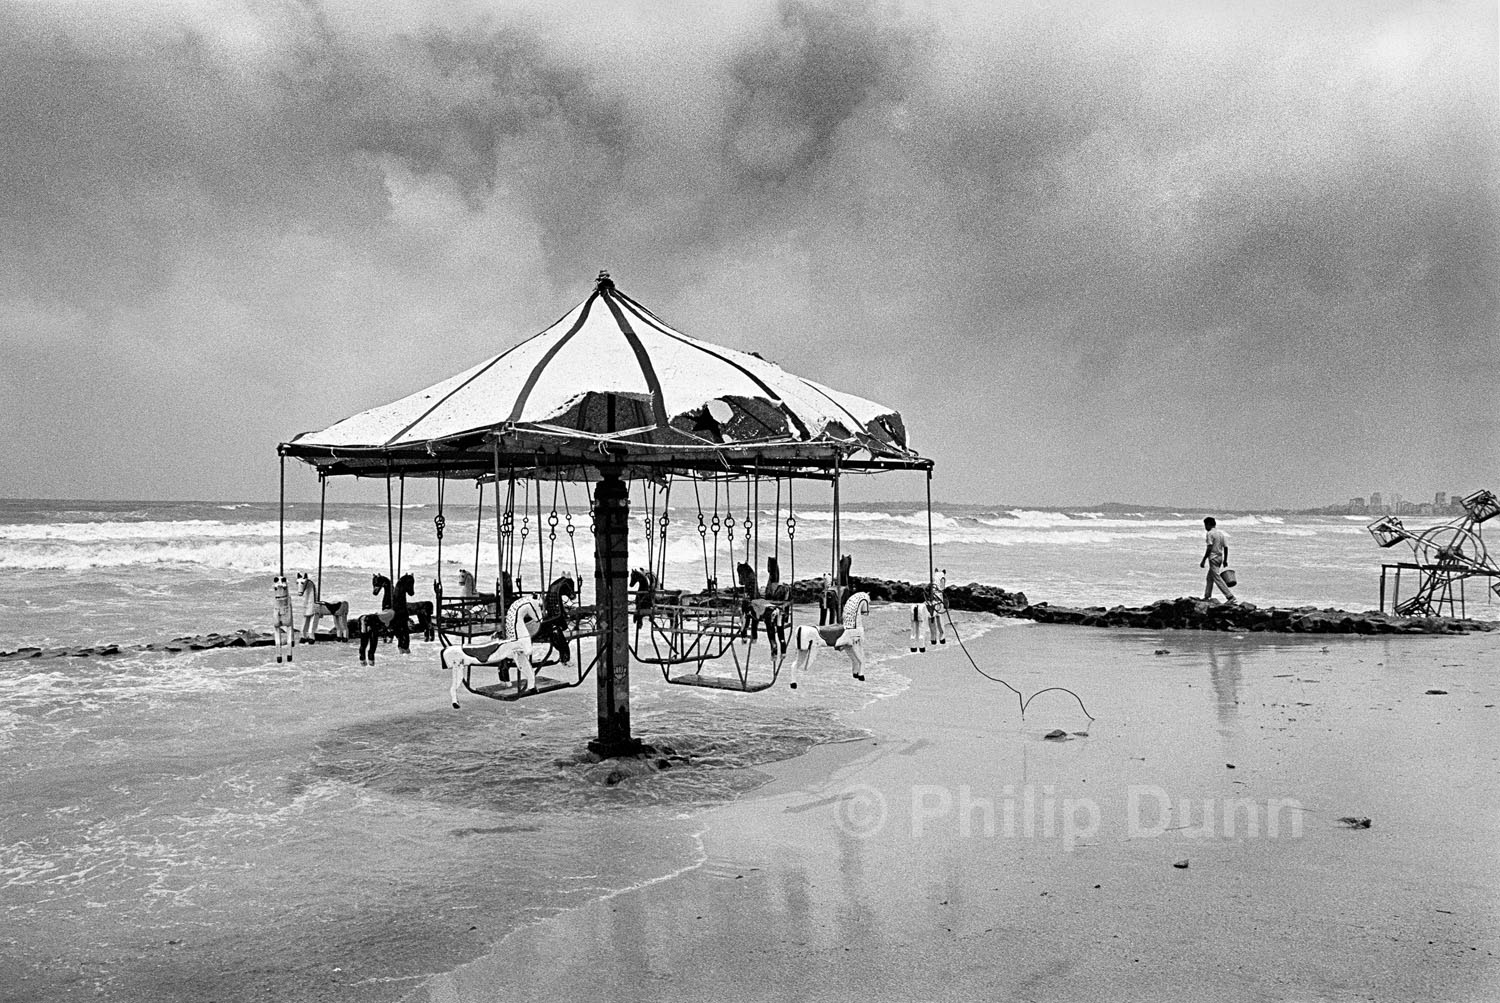 beach fairground washed by the tide at Juhu, Bombay, India